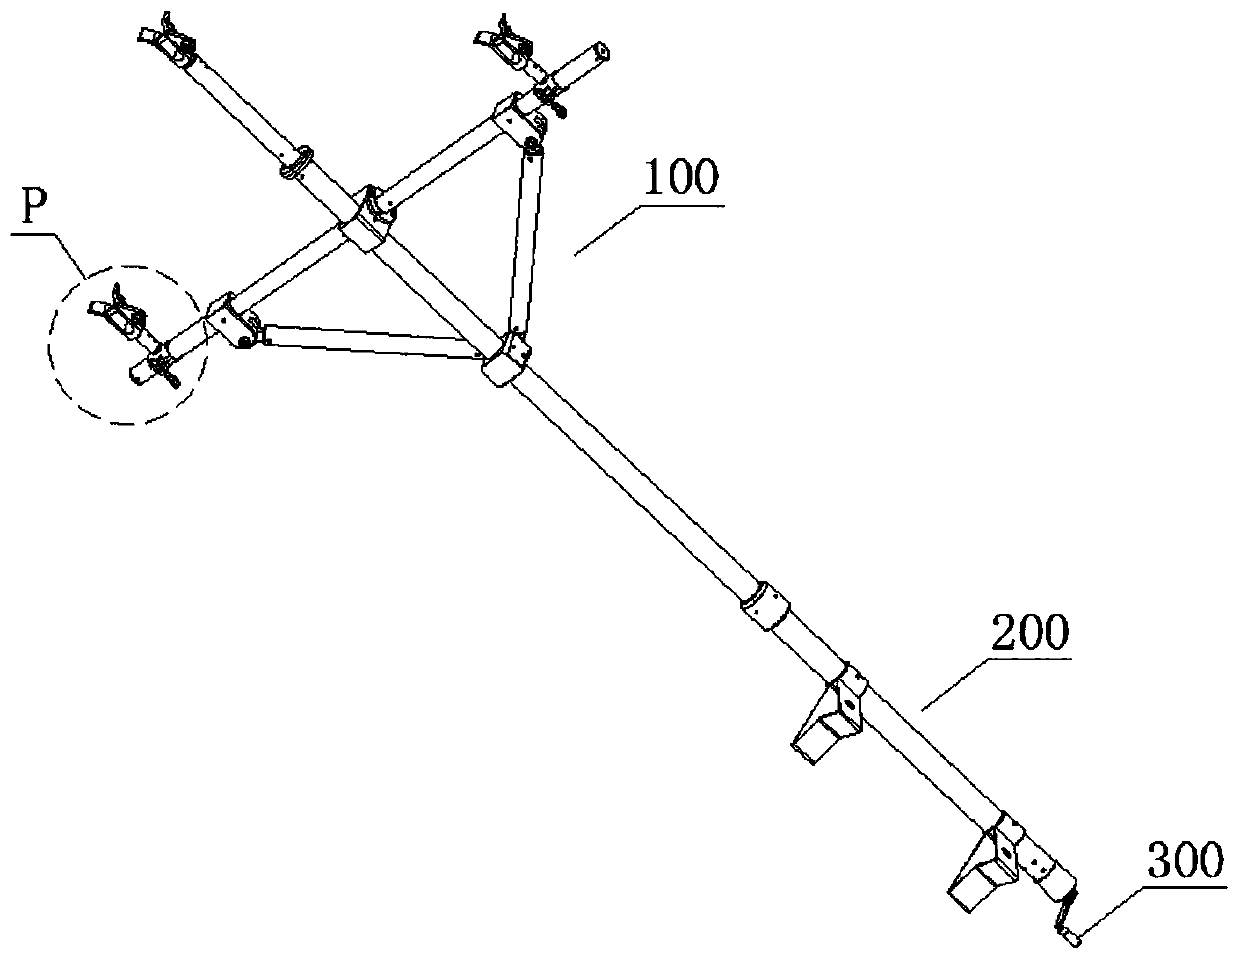 Lifting cross arm for hot-line work and application method of lifting cross arm